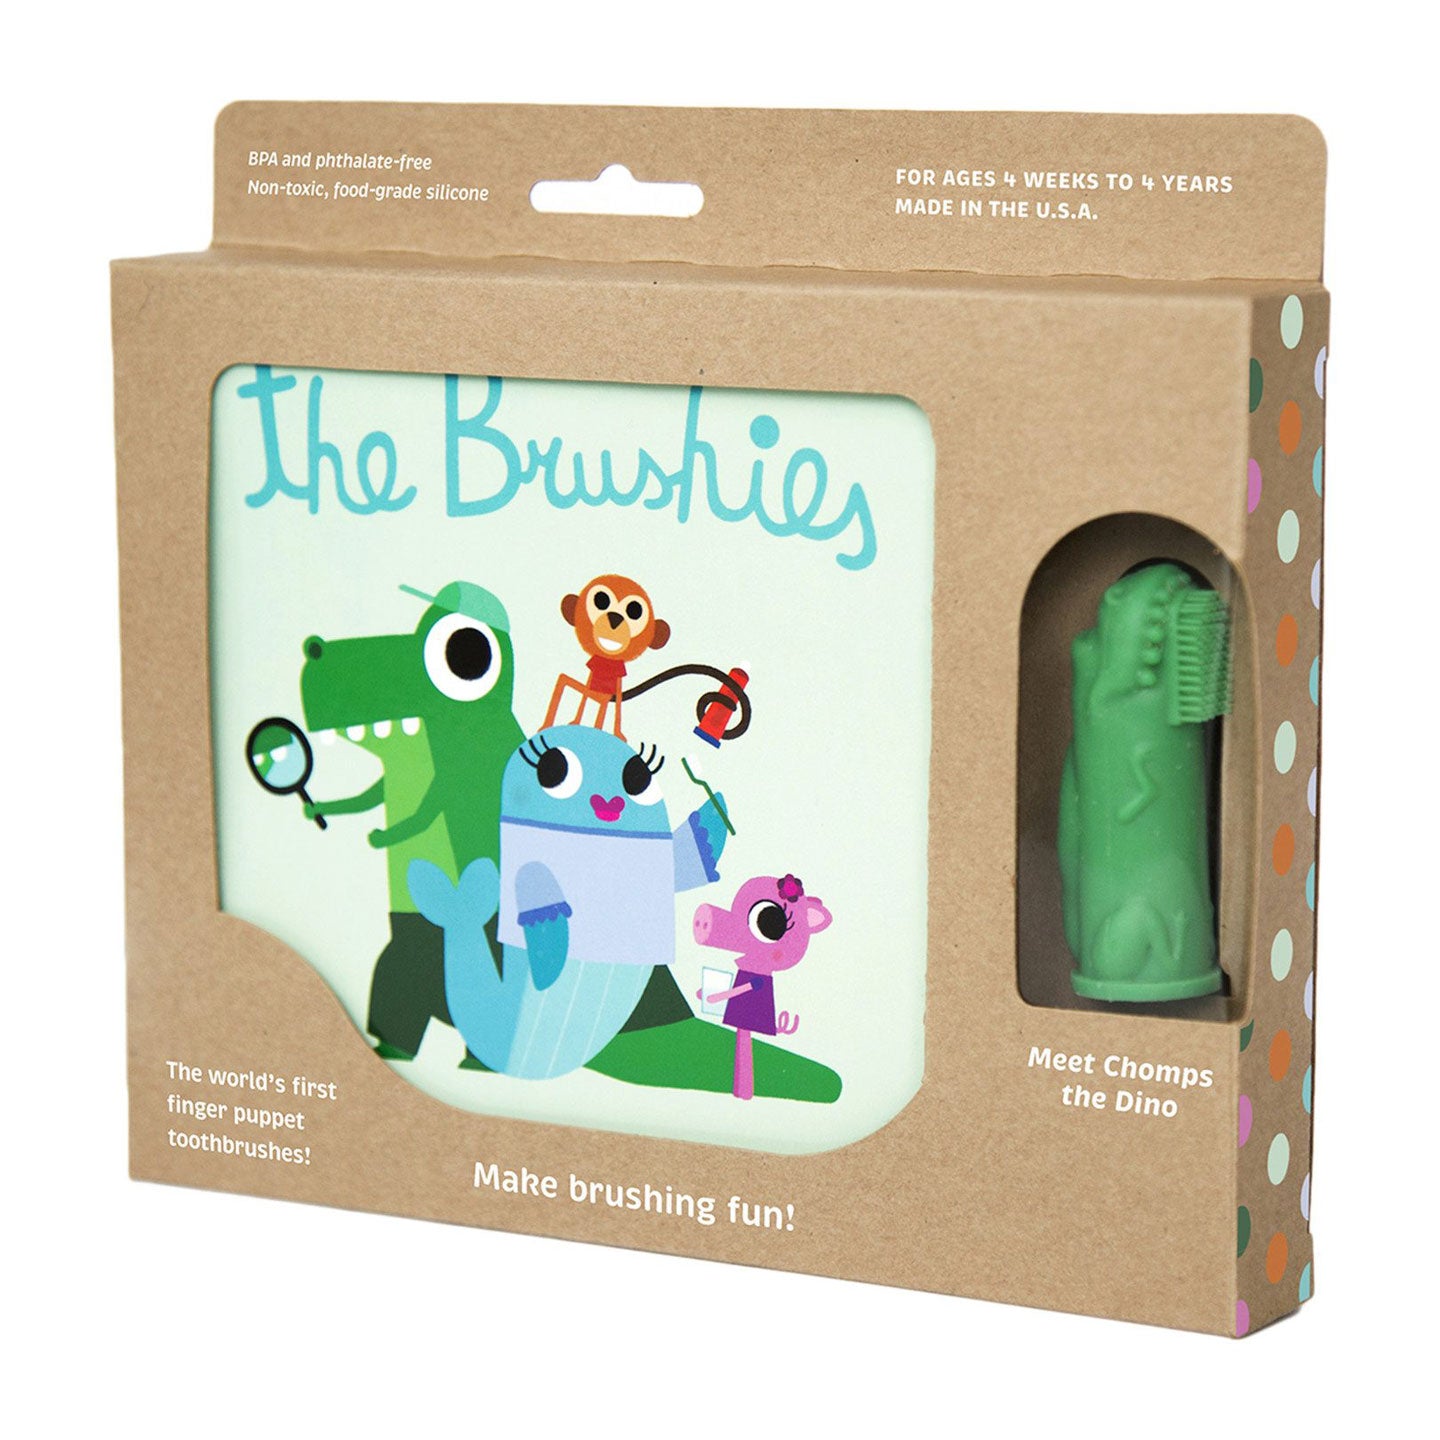 Chomps the Dino + The Brushies Book